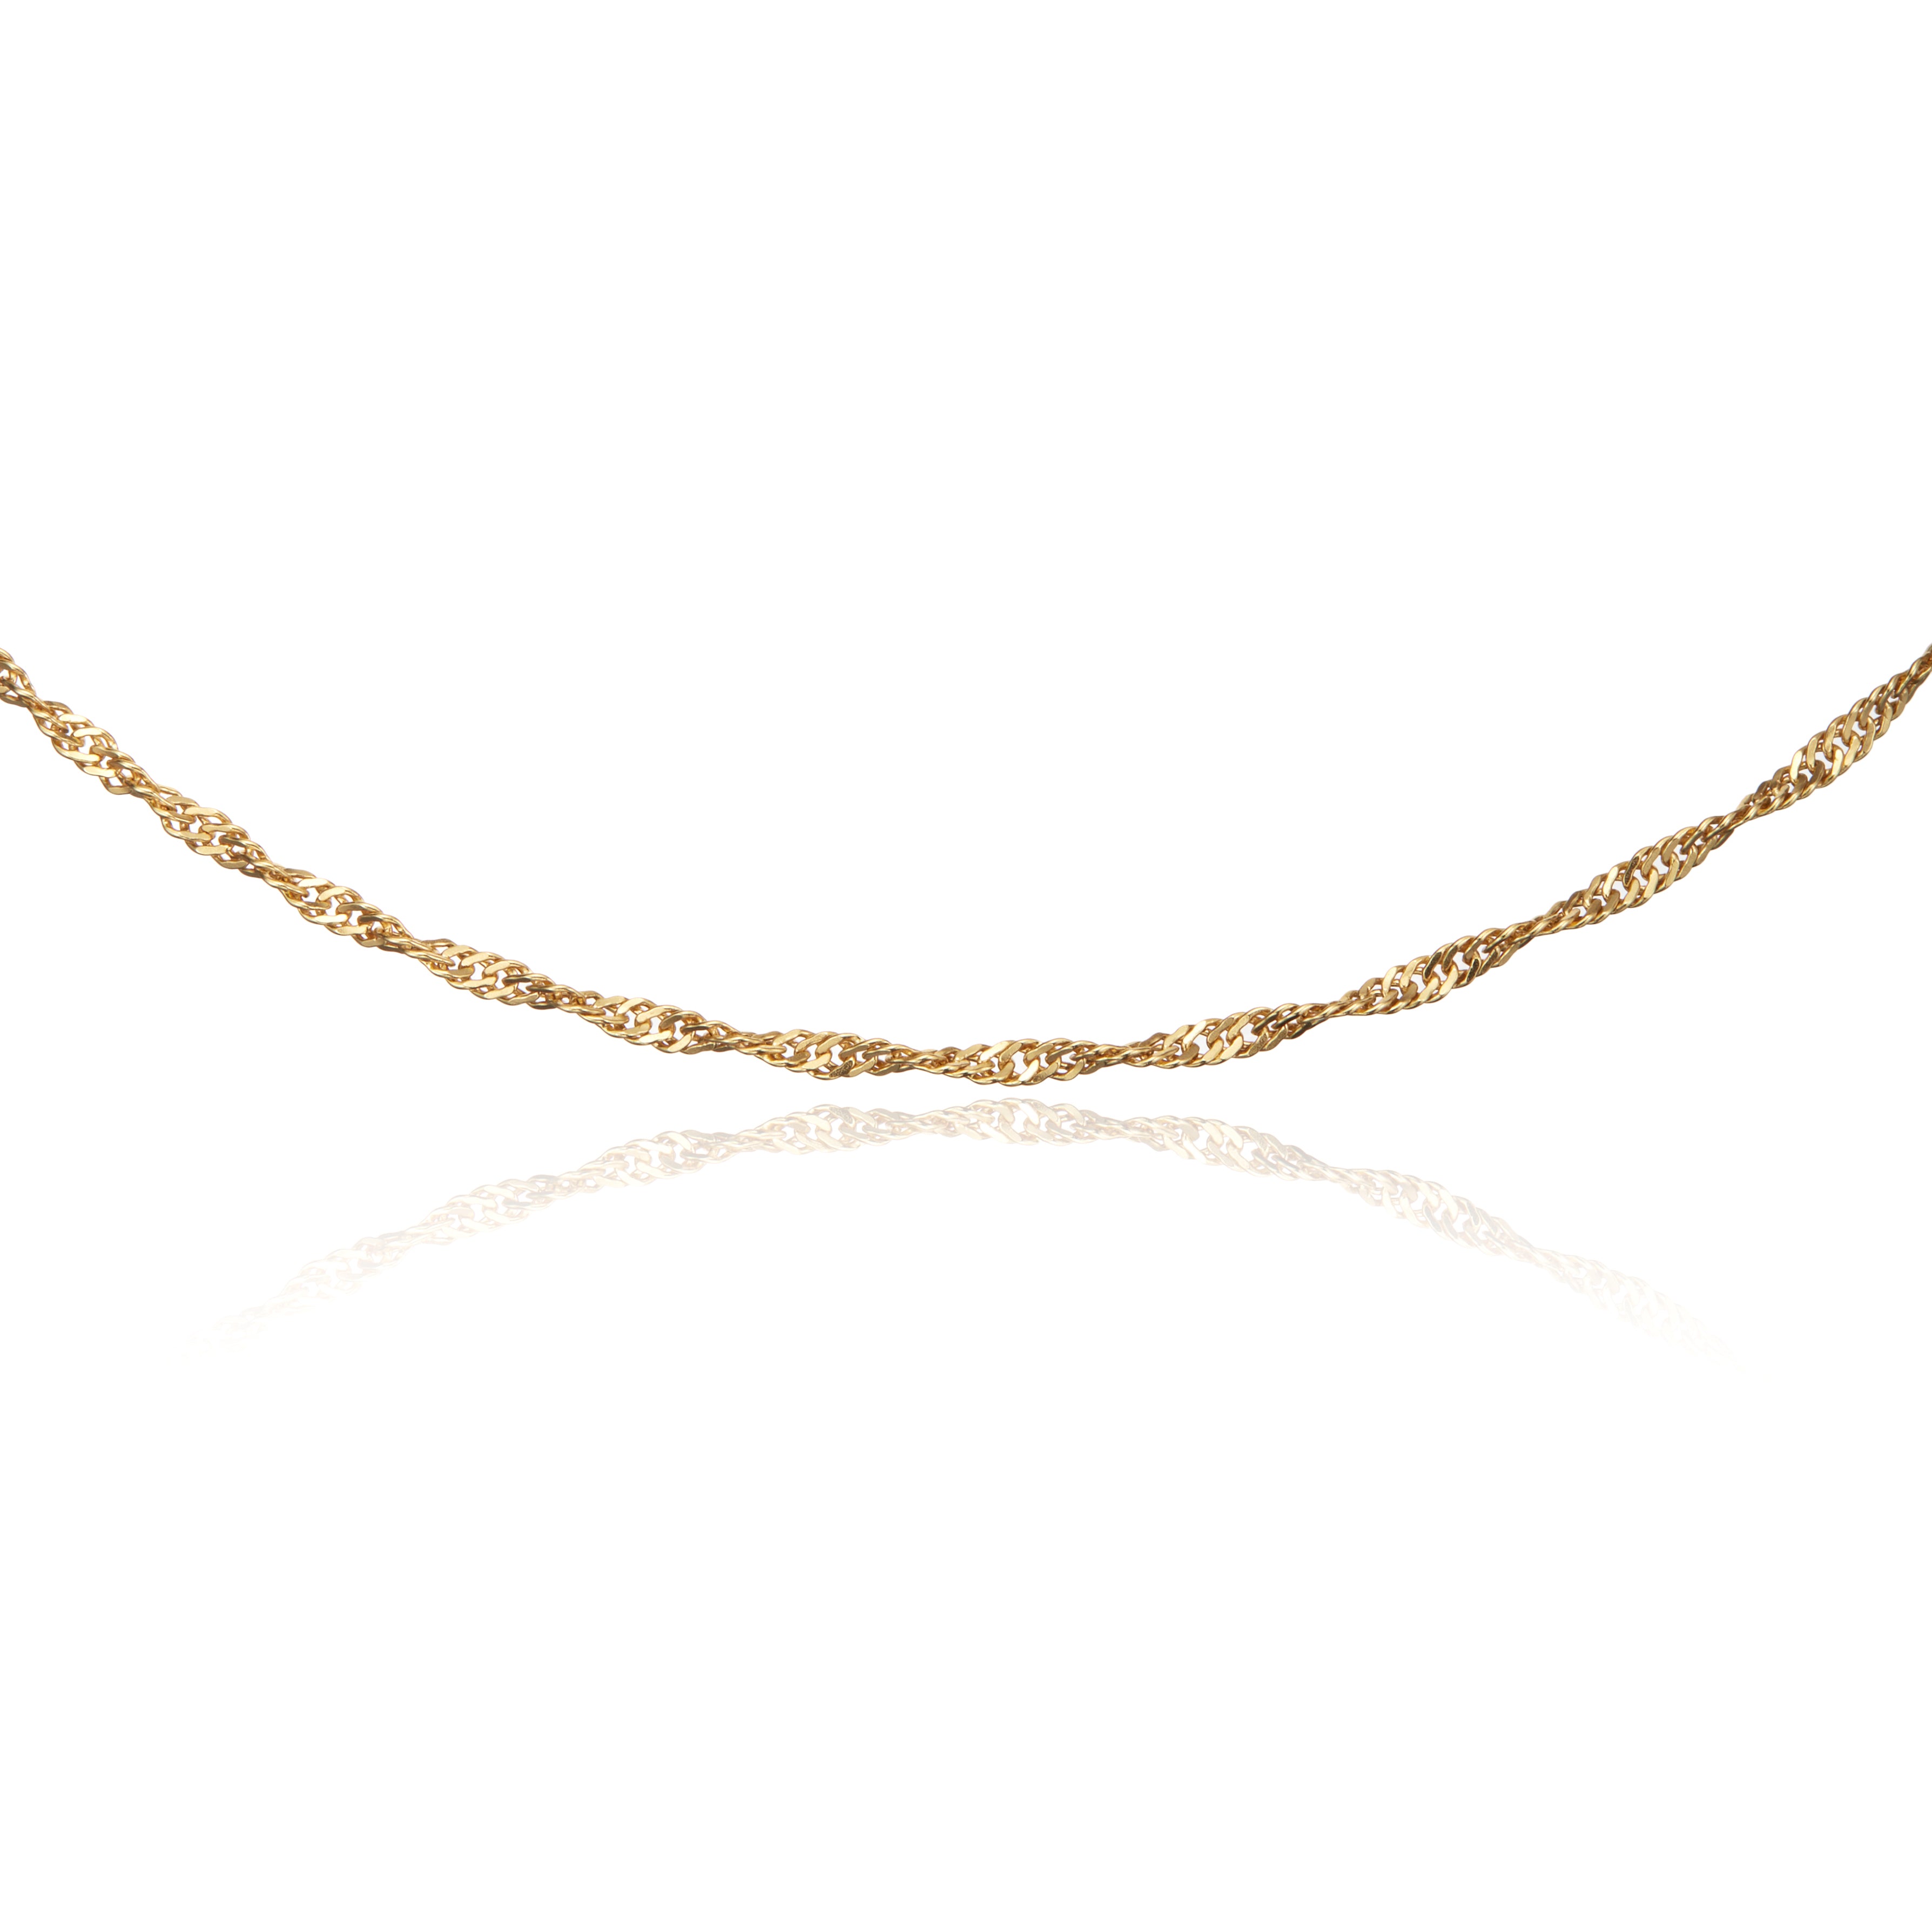 Bottom part of gold twisted rope chain necklace on a white background with it's reflection below it